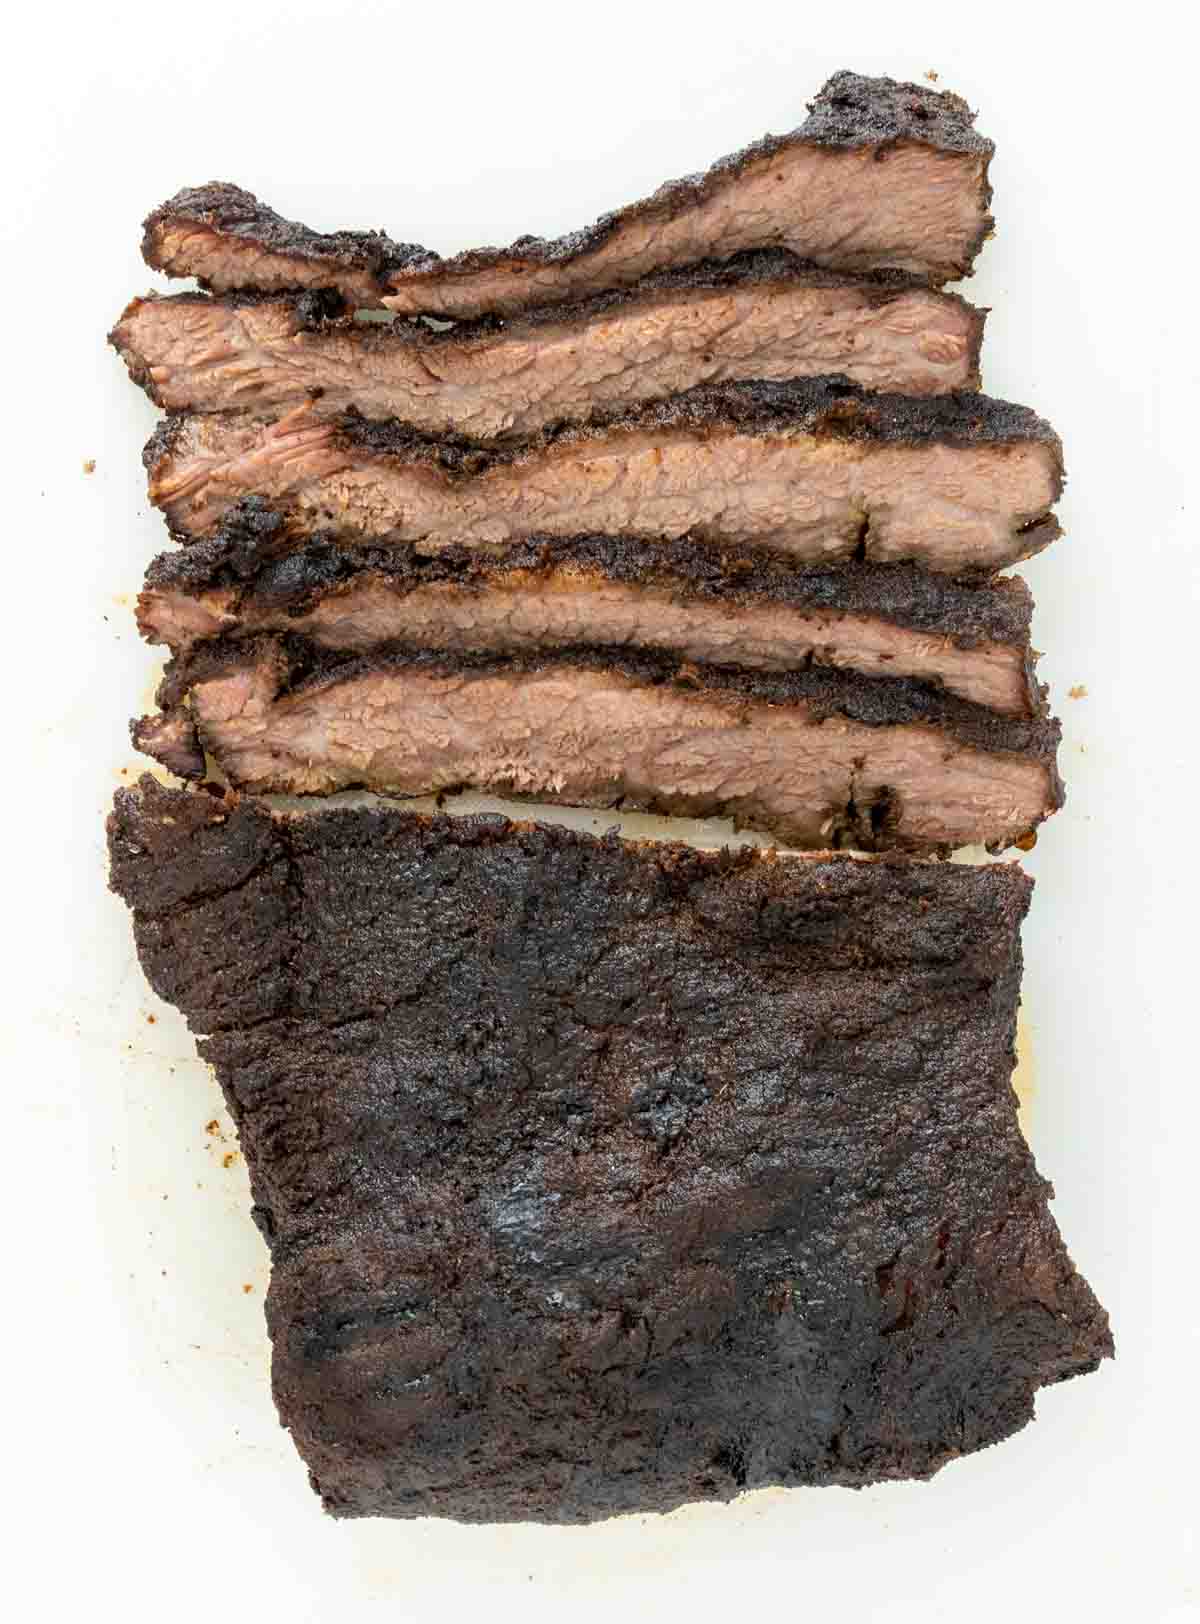 Sliced smoked beef brisket on a white platter.